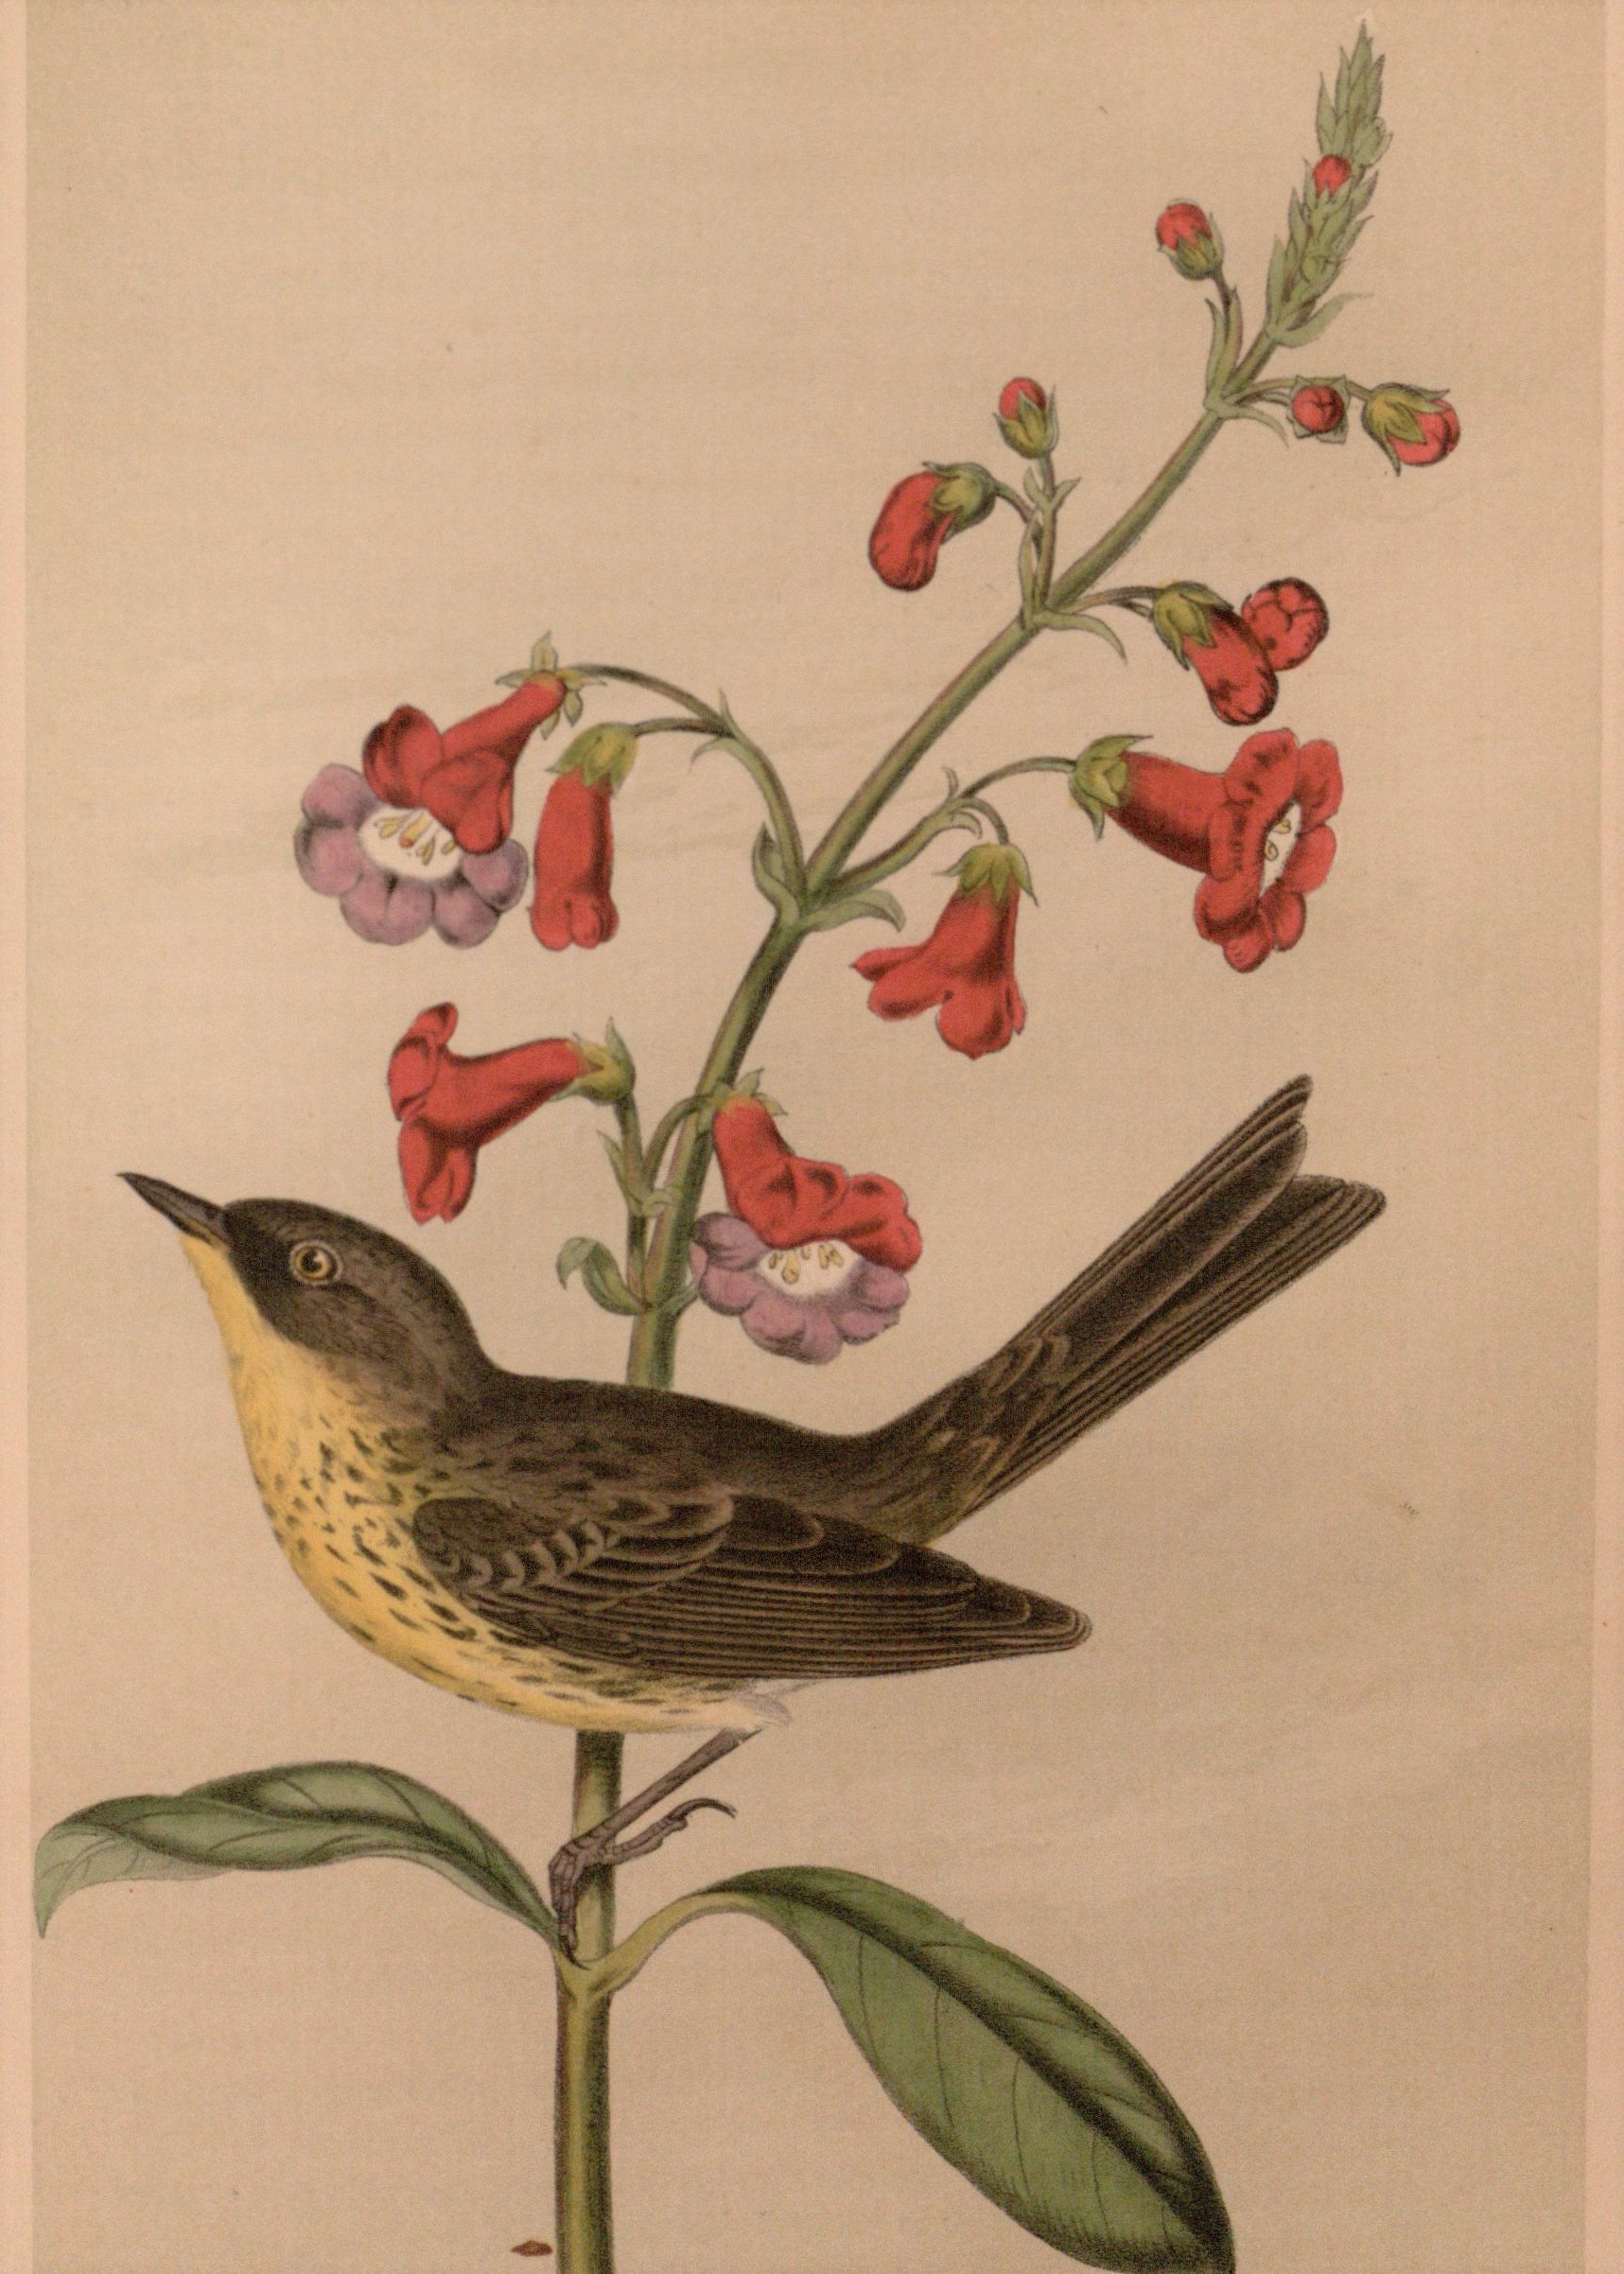 Cassin’s colorful plate of Kirtland’s Warbler